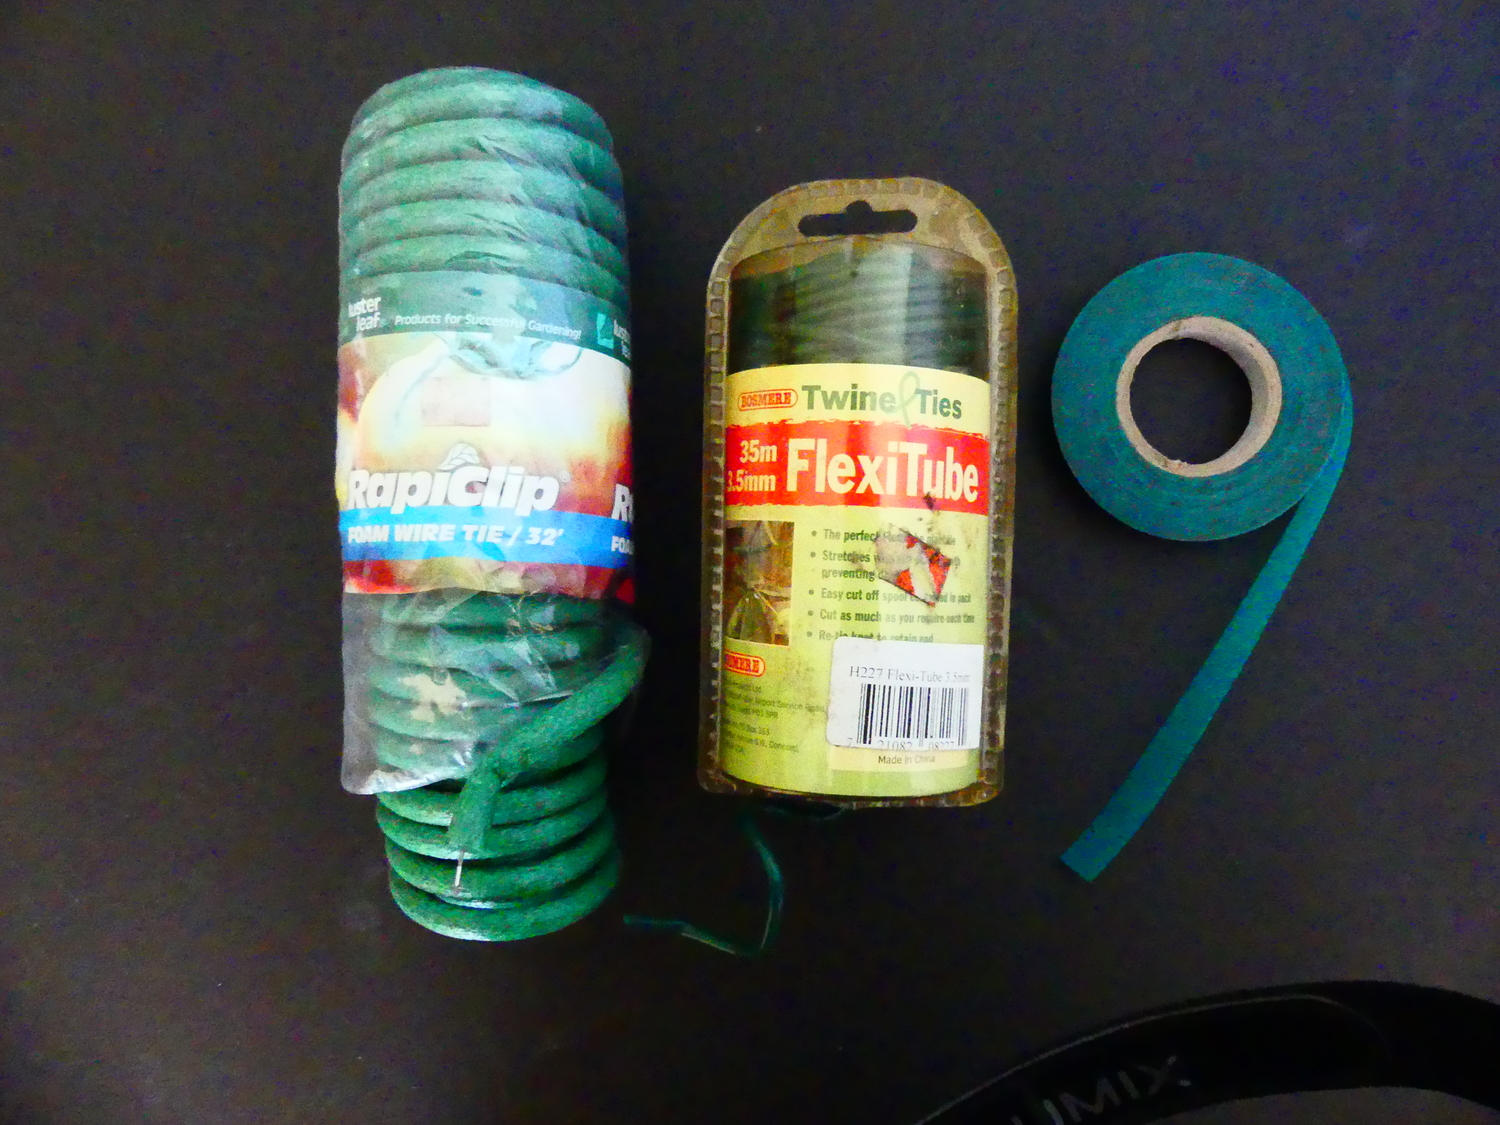 Of the many ways to tie a tomato plant, these three stand out. The foam-covered wire on the left can be cut to size and easily manipulated as needed. The same is true of the Flexitube tie  (center) but it’s thinner and can result in broken stems in heavy wind. On the right is a roll of thin vinyl tape that can be easily tied and wrapped without damaging branches and stems.  Half-inch-wide tape is shown here, and there is a 1-inch wide tape as well. Pieces of all three can and should be collected at the end of the season as all are reusable for several seasons.  ANDREW MESSINGER